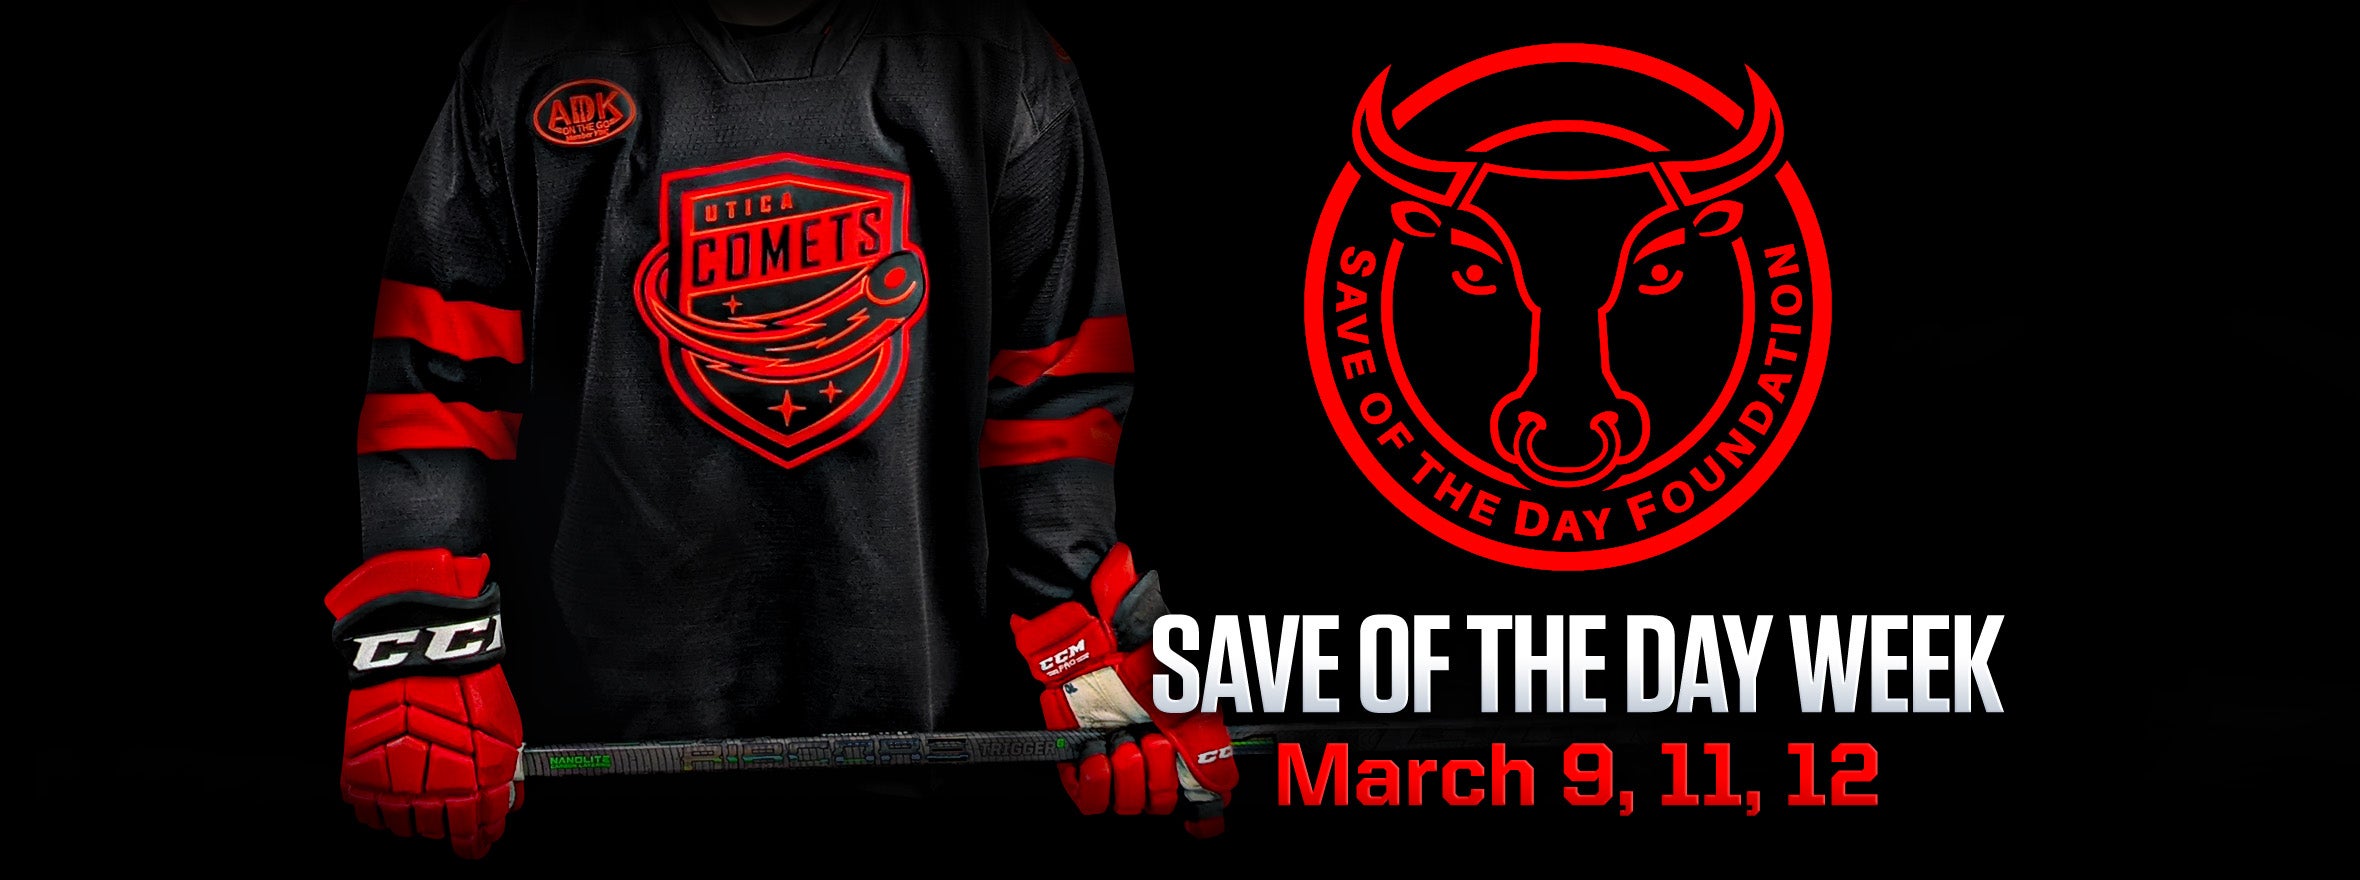 2021-22 SAVE OF THE DAY JERSEY AUCTION DETAILS